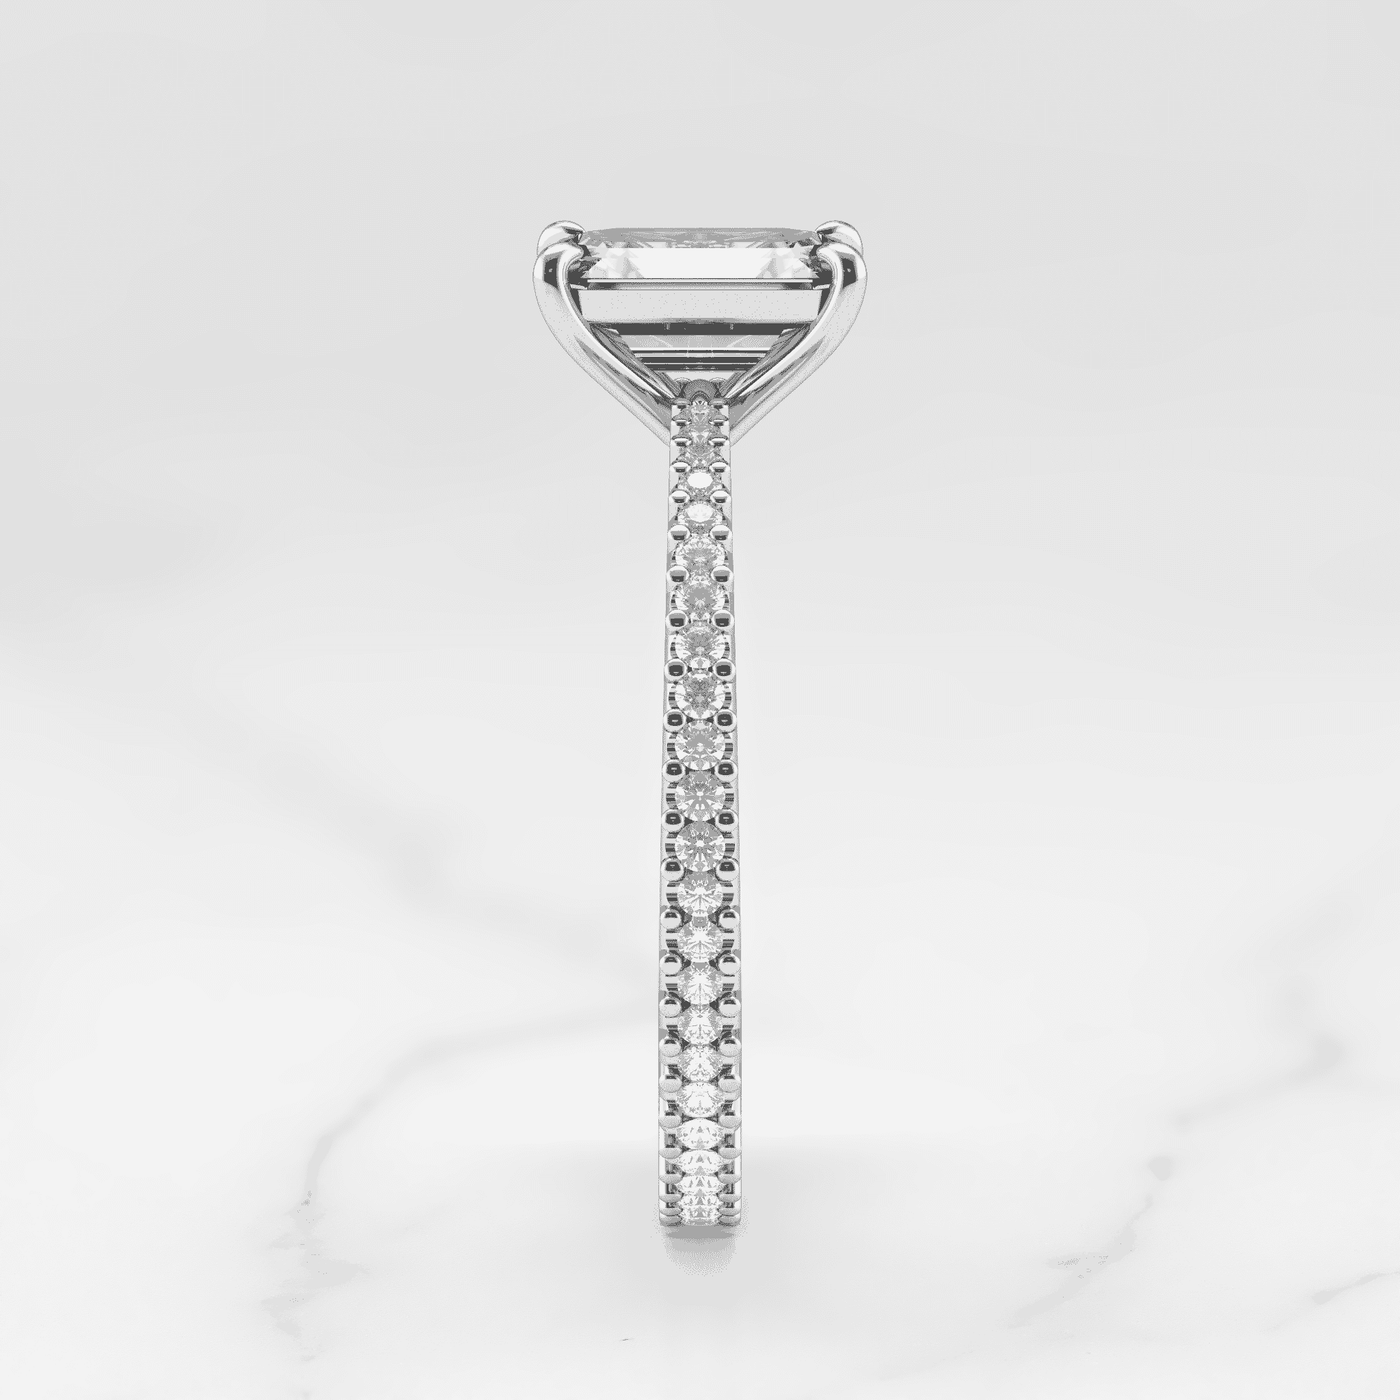 Emerald Cut Tapered White Diamond Full Pave Ring